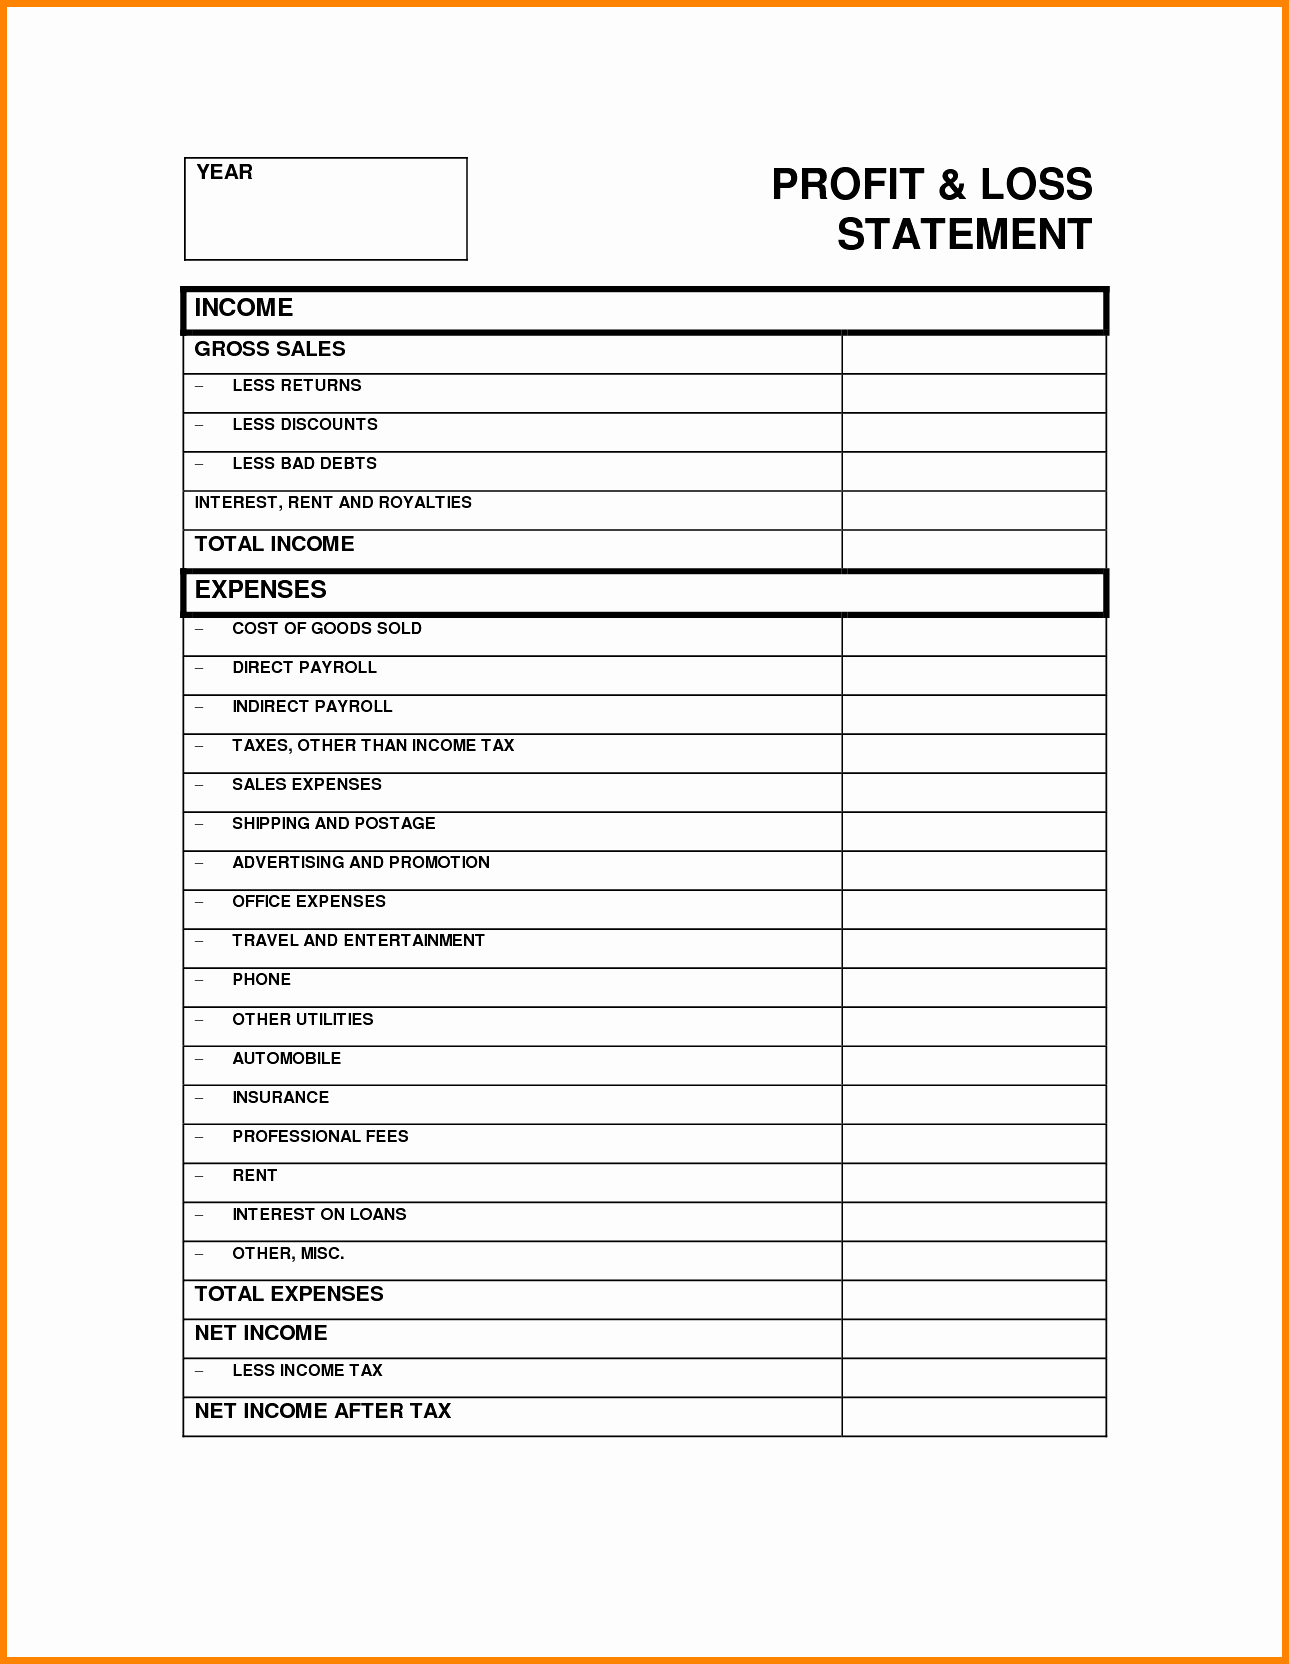 Income Statement Template Word Awesome Business Profit and Loss Statement for Self Employed Mughals